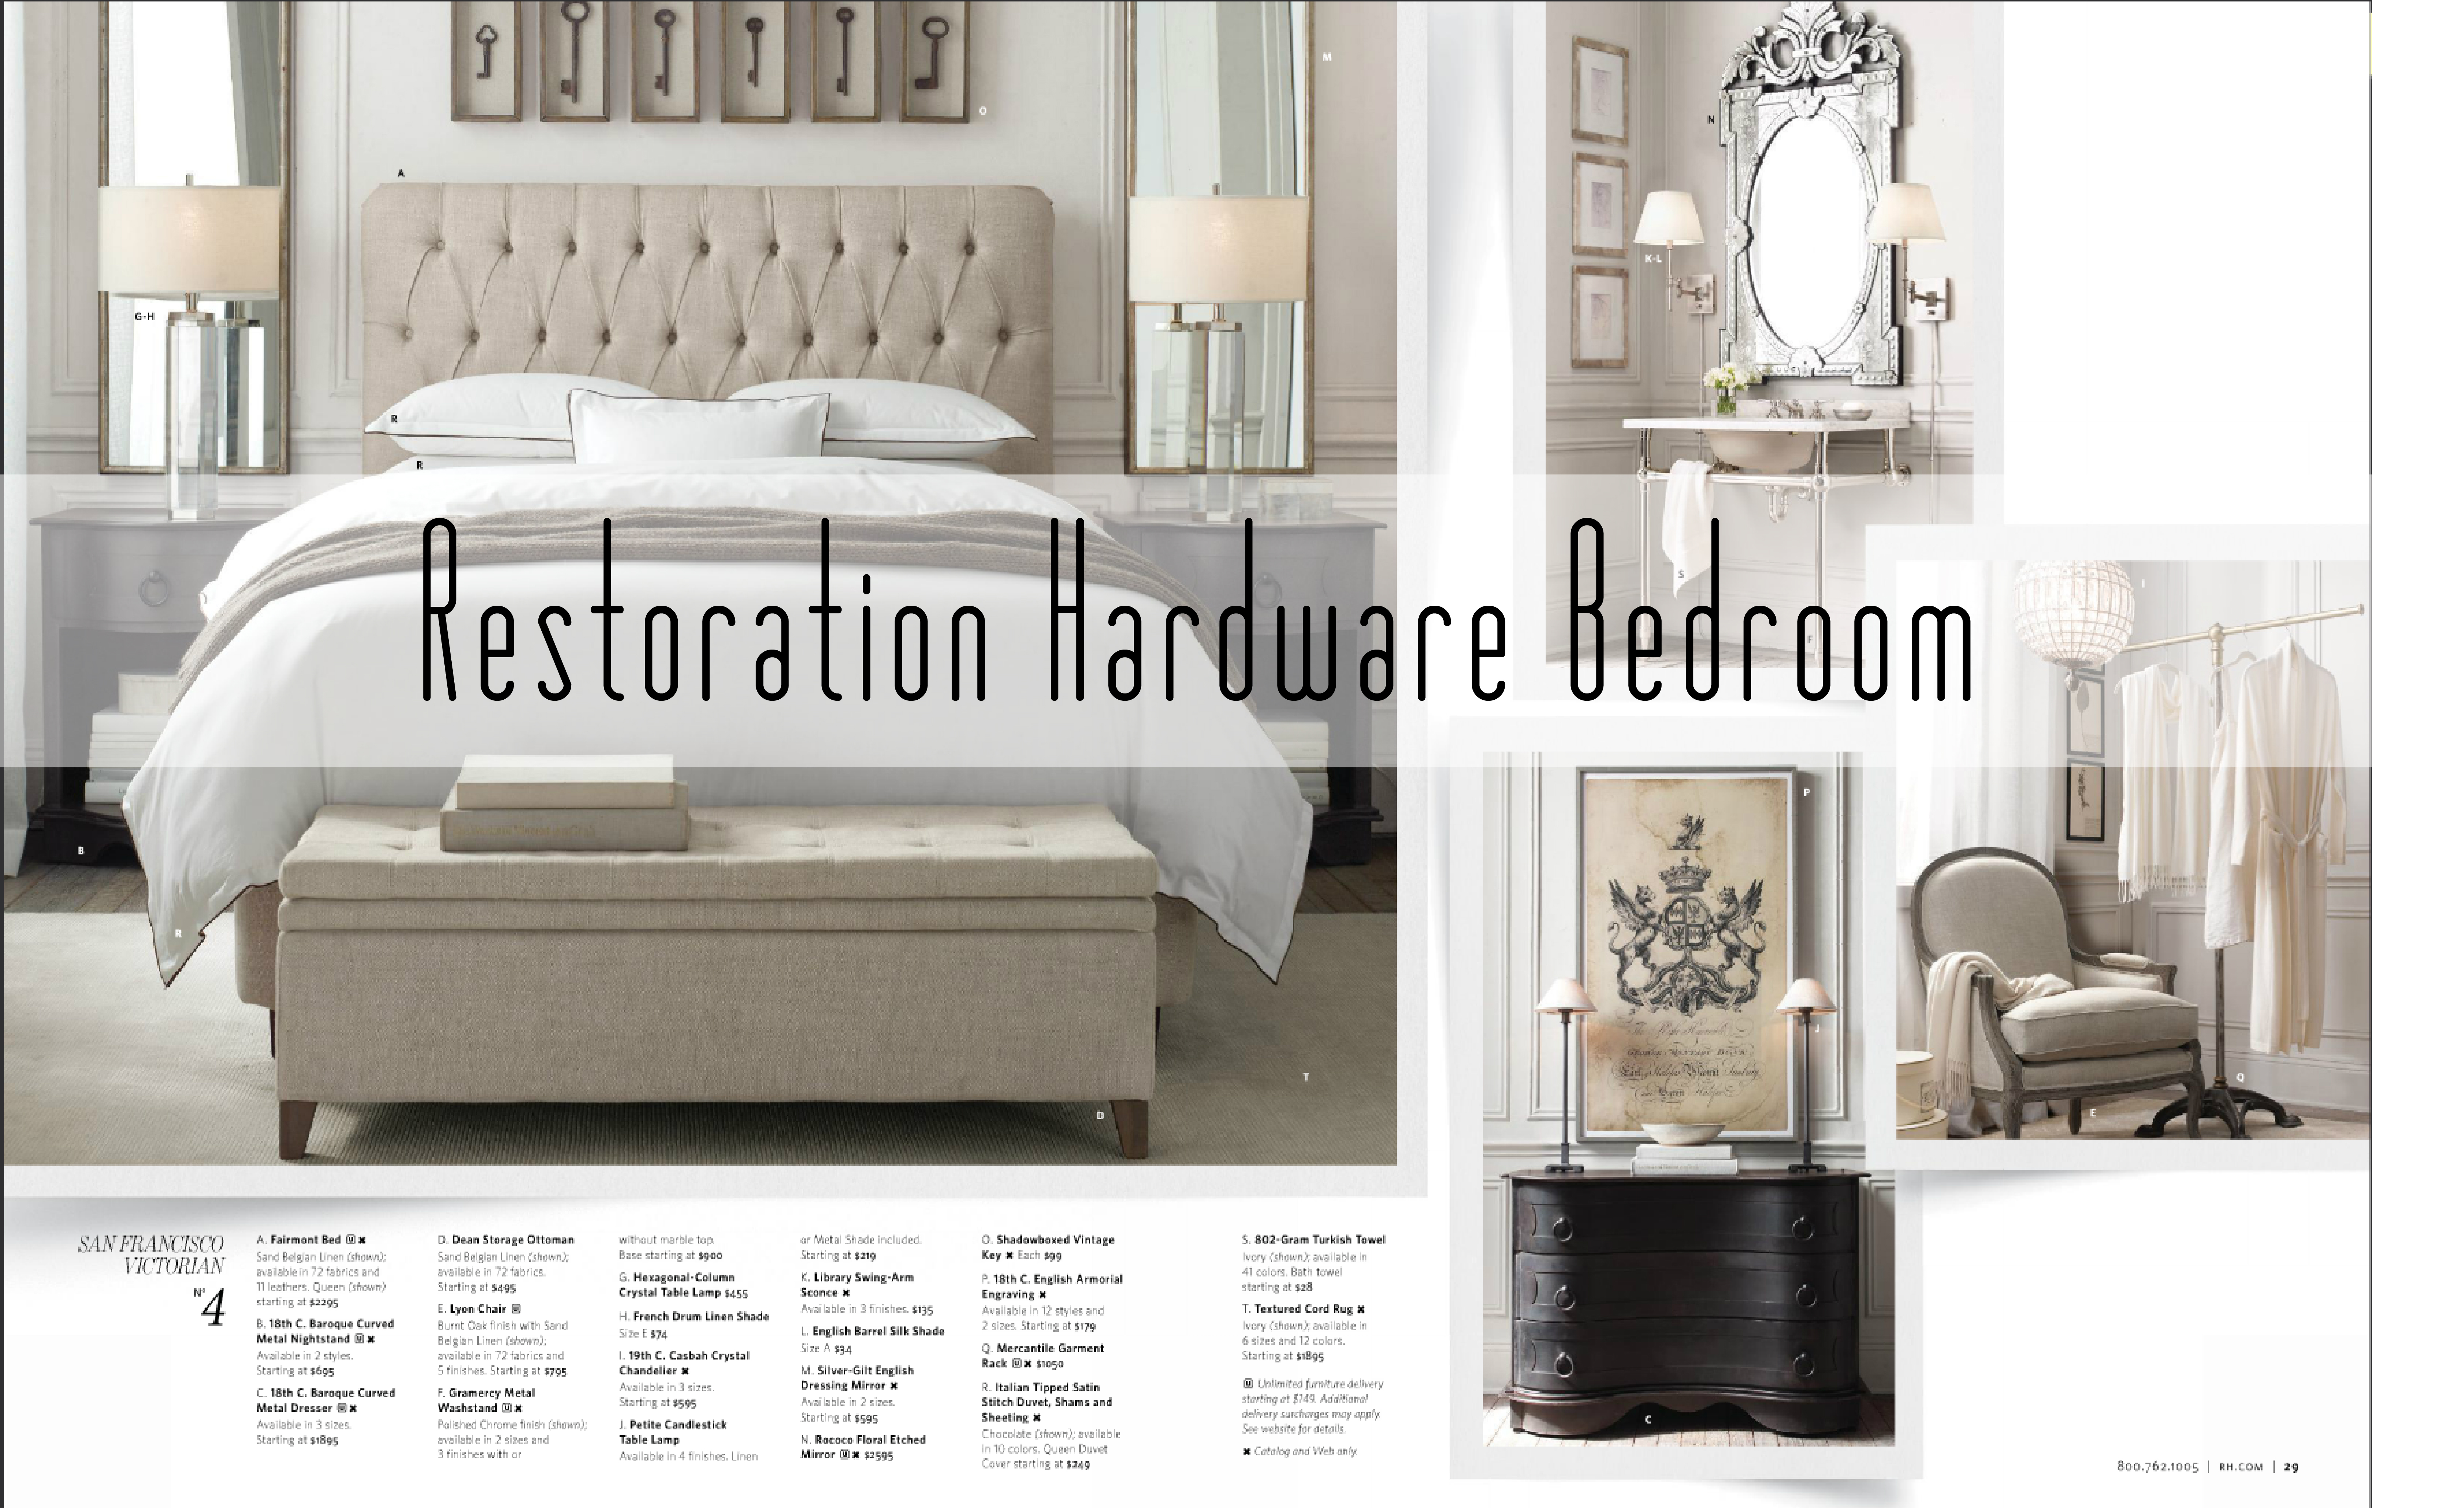 Get The Look For Less Restoration Hardware Bedroom Dwell Beautiful